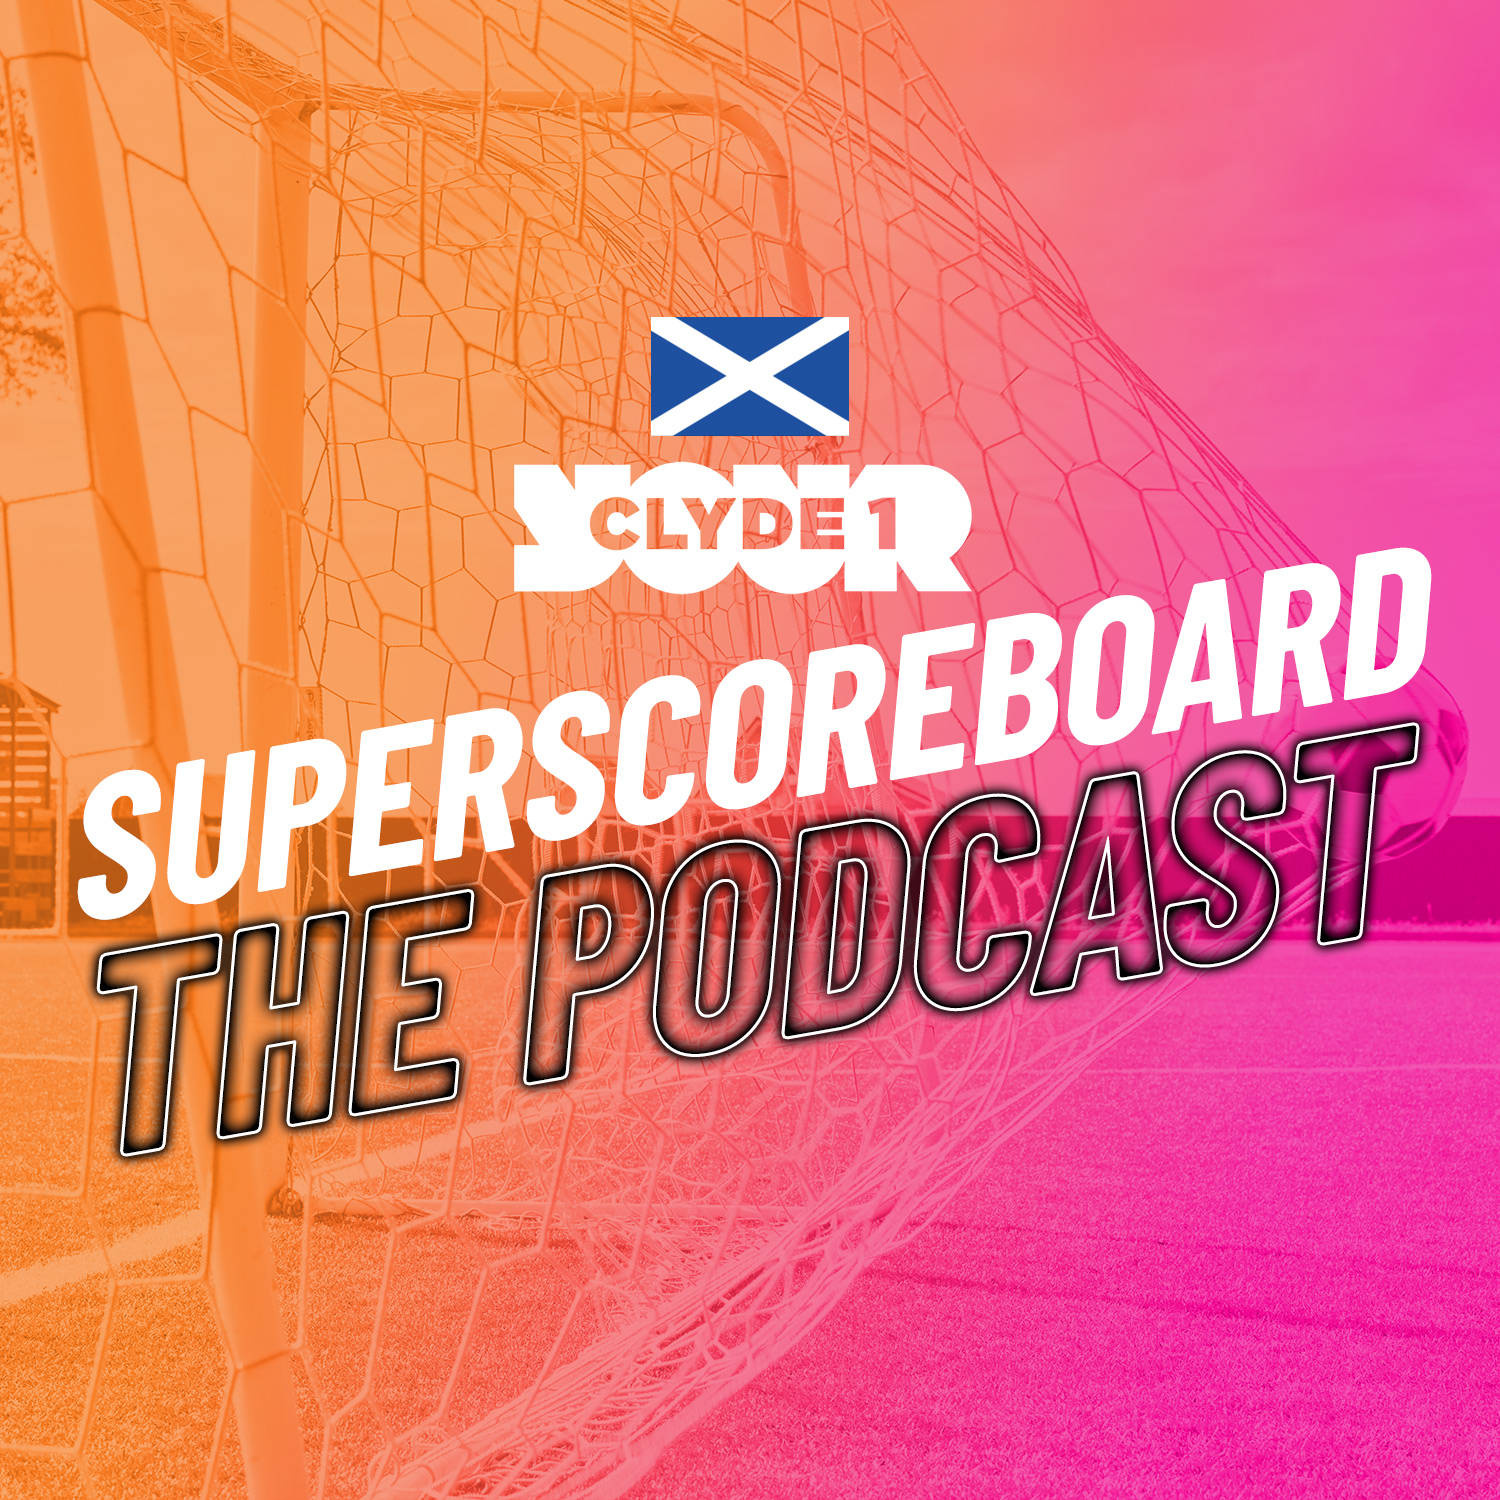 Saturday 30th March Clyde 1 Superscoreboard Part 2